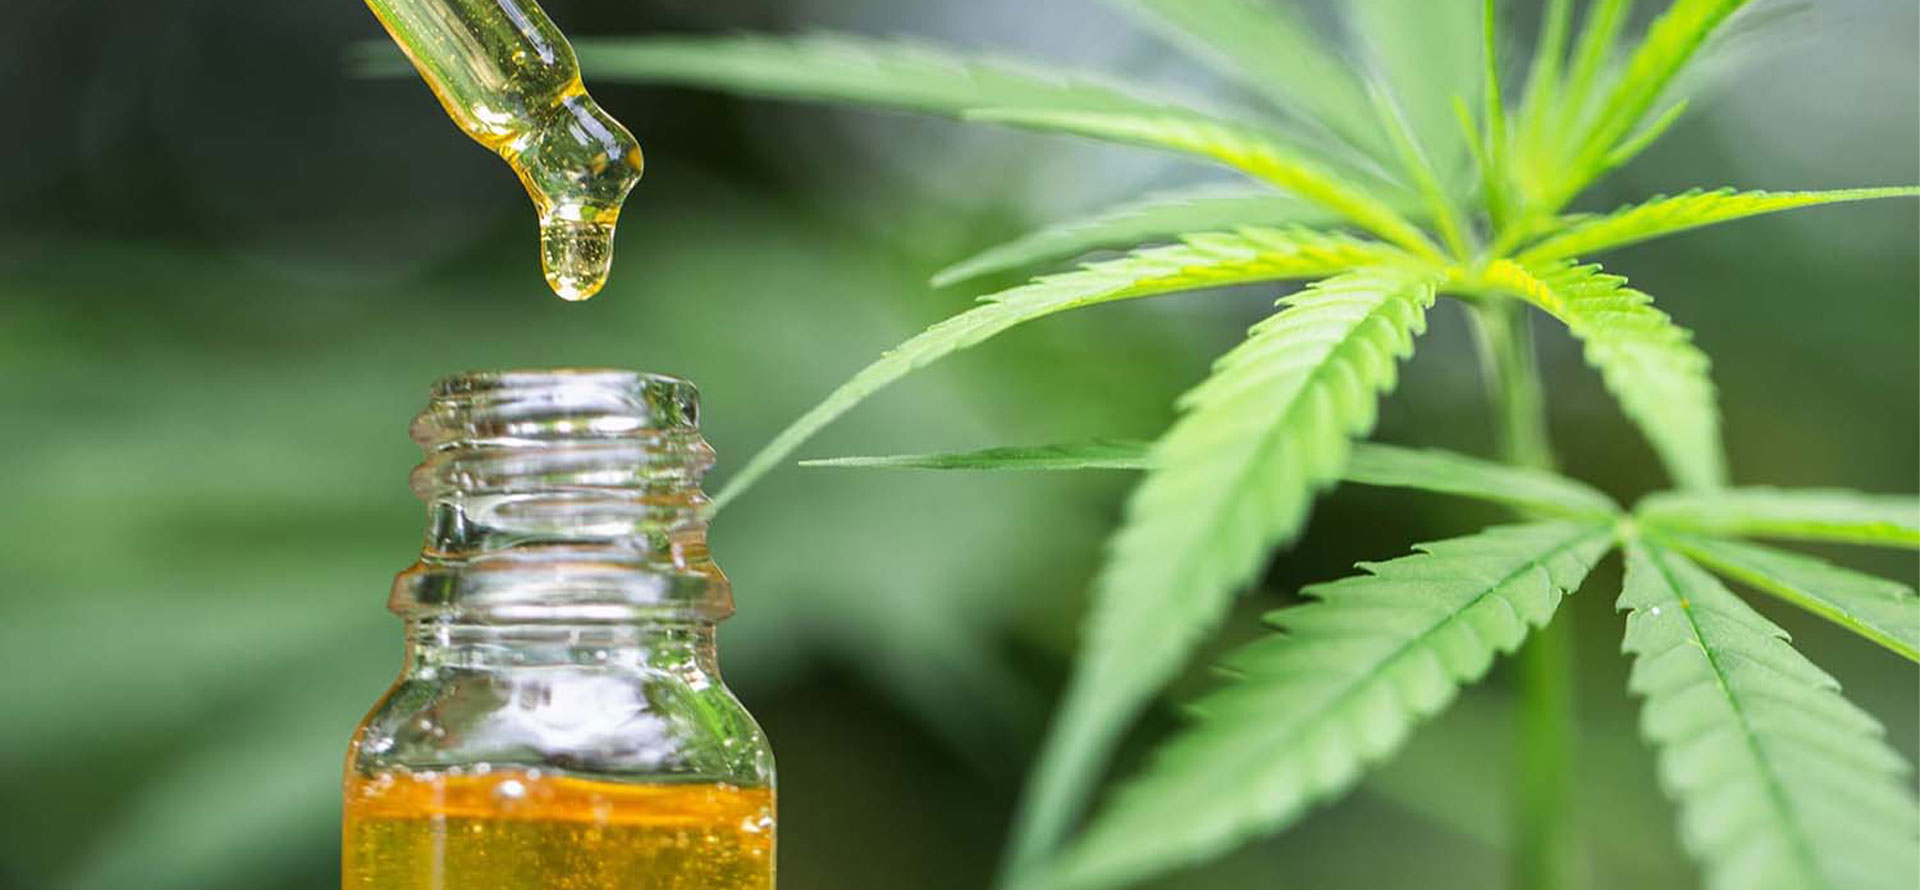 CBC OIL MOLINE - Cbd|Oil|Benefits|Cbc|Effects|Pain|Study|Health|Thc|Products|Cannabinoids|Studies|Research|Anxiety|Cannabis|Symptoms|Evidence|People|System|Disease|Treatment|Inflammation|Hemp|Body|Receptors|Disorders|Brain|Plant|Cells|Side|Effect|Blood|Patients|Cancer|Product|Skin|Marijuana|Properties|Cannabidiol|Cannabinoid|Cbd Oil|Cbd Products|Cbc Oil|Side Effects|Endocannabinoid System|Chronic Pain|Multiple Sclerosis|Pain Relief|Cannabis Plant|Cbd Oil Benefits|Blood Pressure|Health Benefits|High Blood Pressure|Anti-Inflammatory Properties|Neuropathic Pain|Animal Studies|Hemp Plant|Hemp Oil|Anxiety Disorders|Cbd Product|Immune System|Clinical Trials|Cbd Gummies|Nerve Cells|Nervous System|Entourage Effect|Hemp Seed Oil|United States|Cbd Oils|Drug Administration